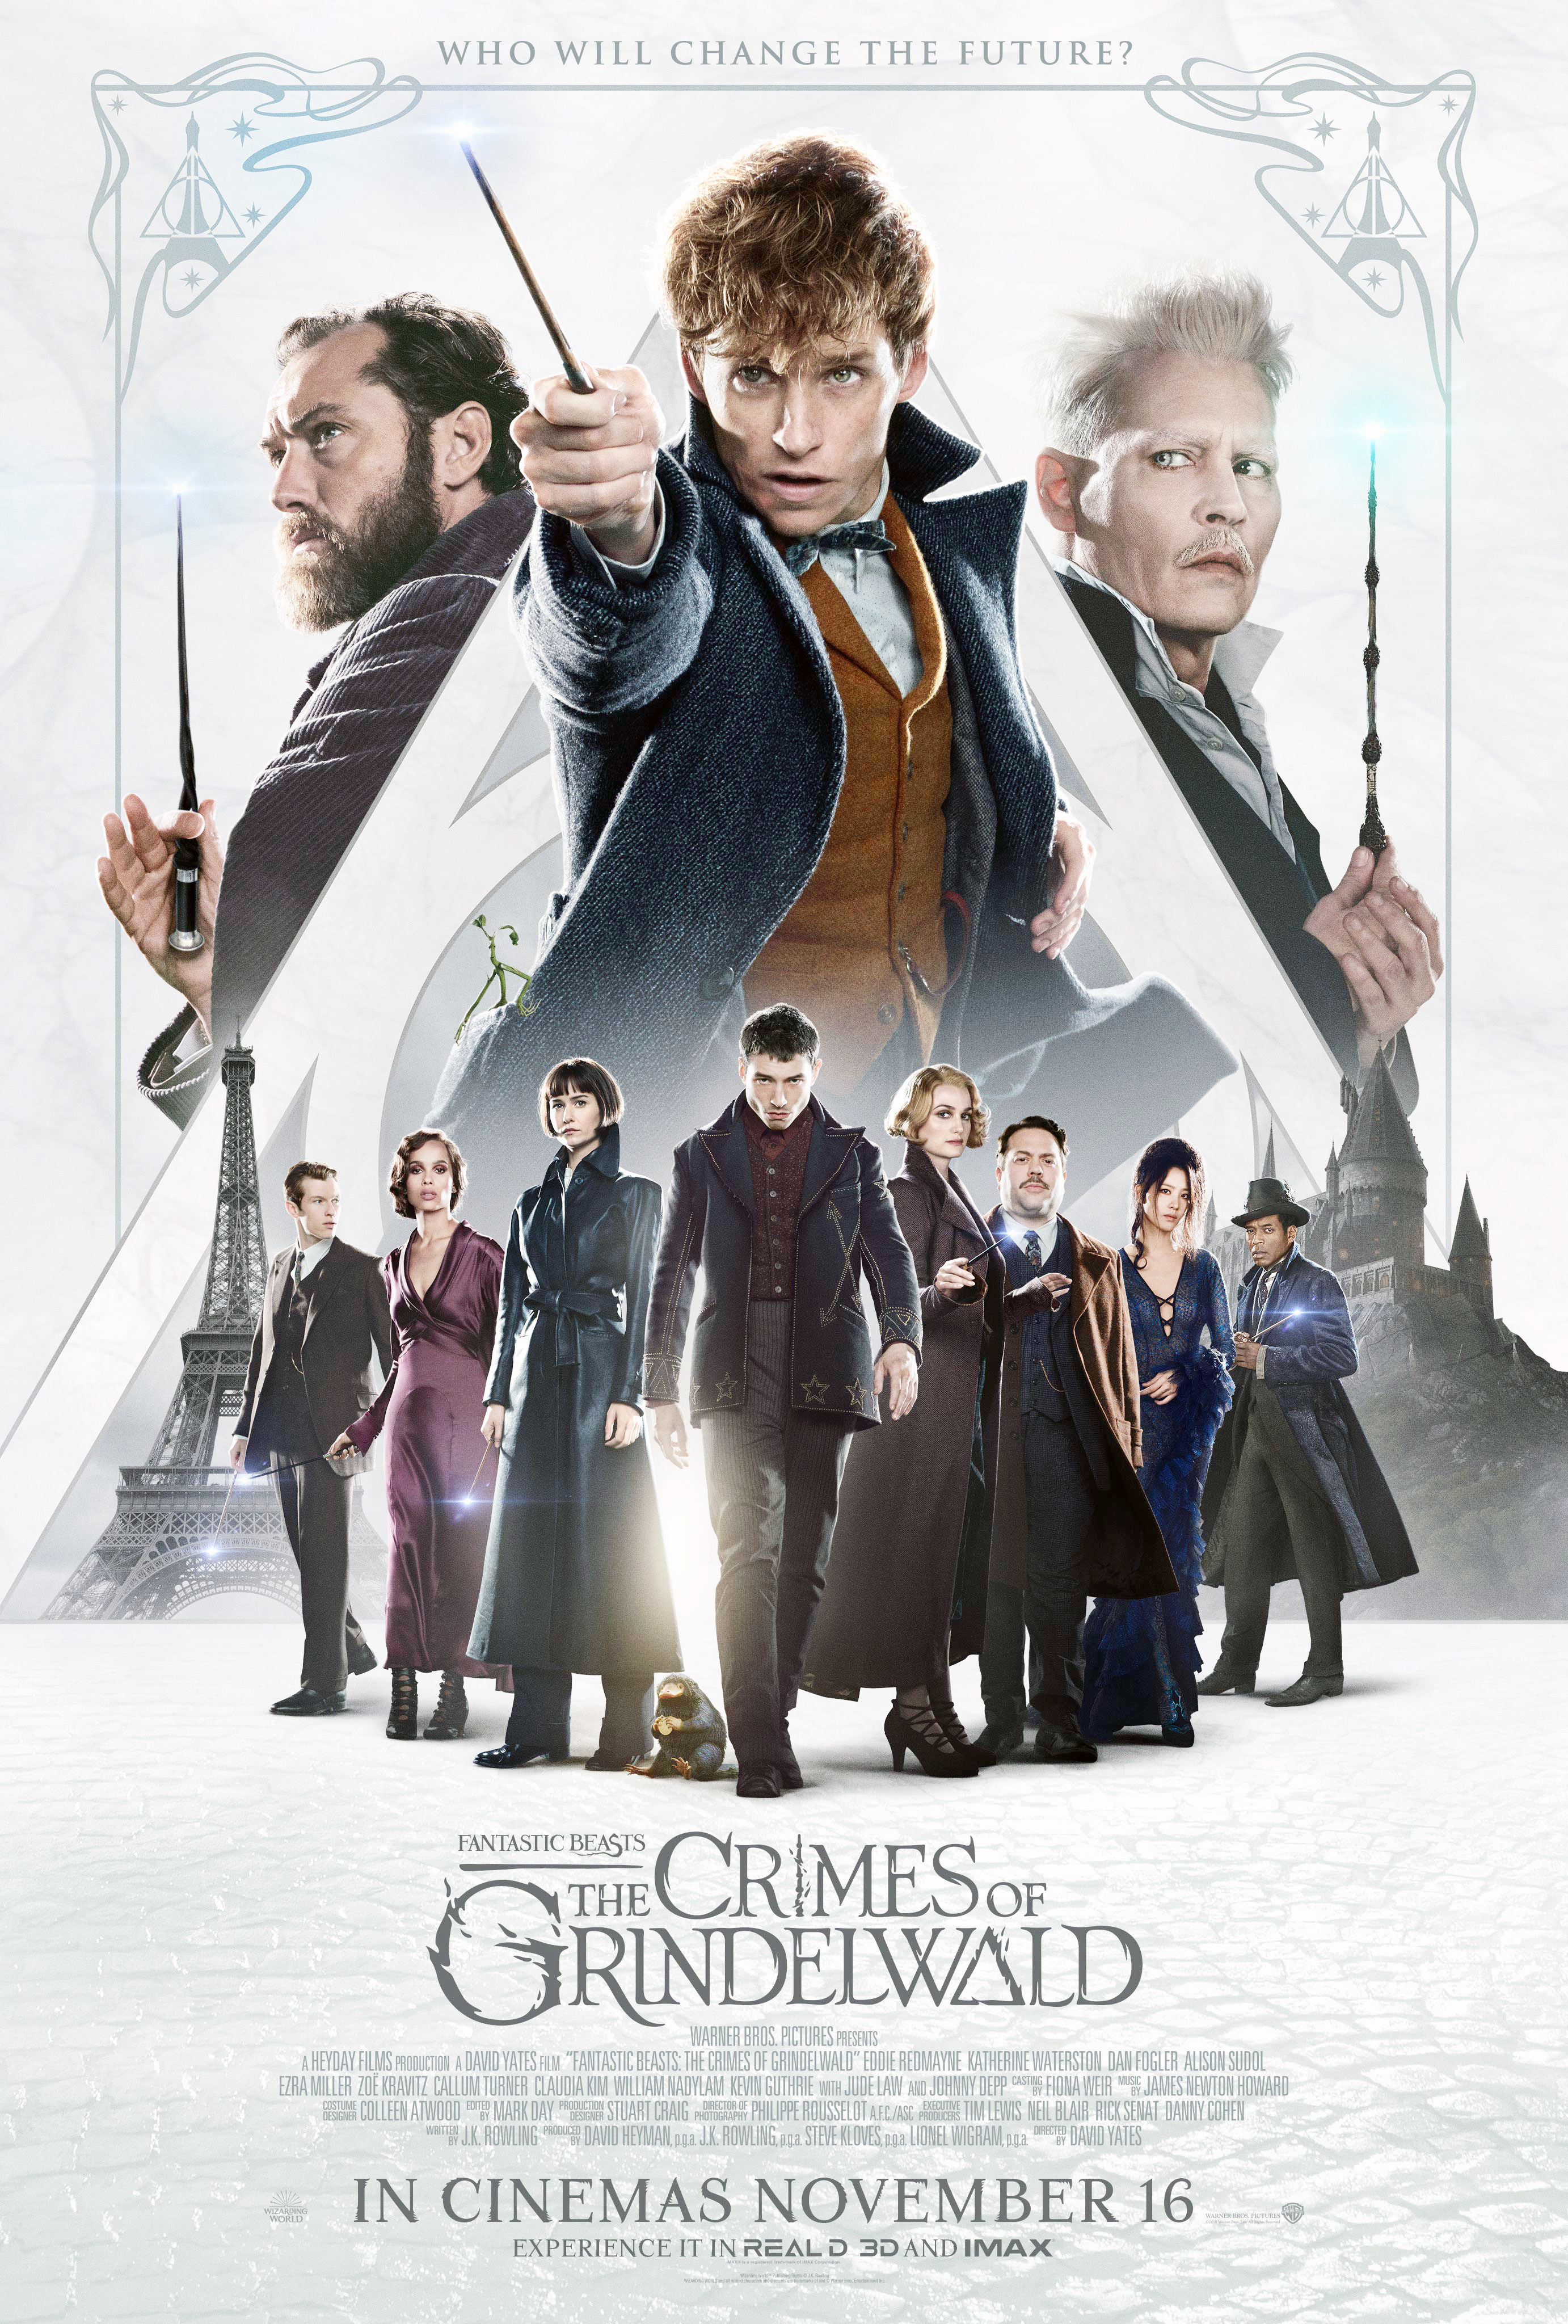 The US poster for Fantastic Beasts: The Crimes of Grindelwald